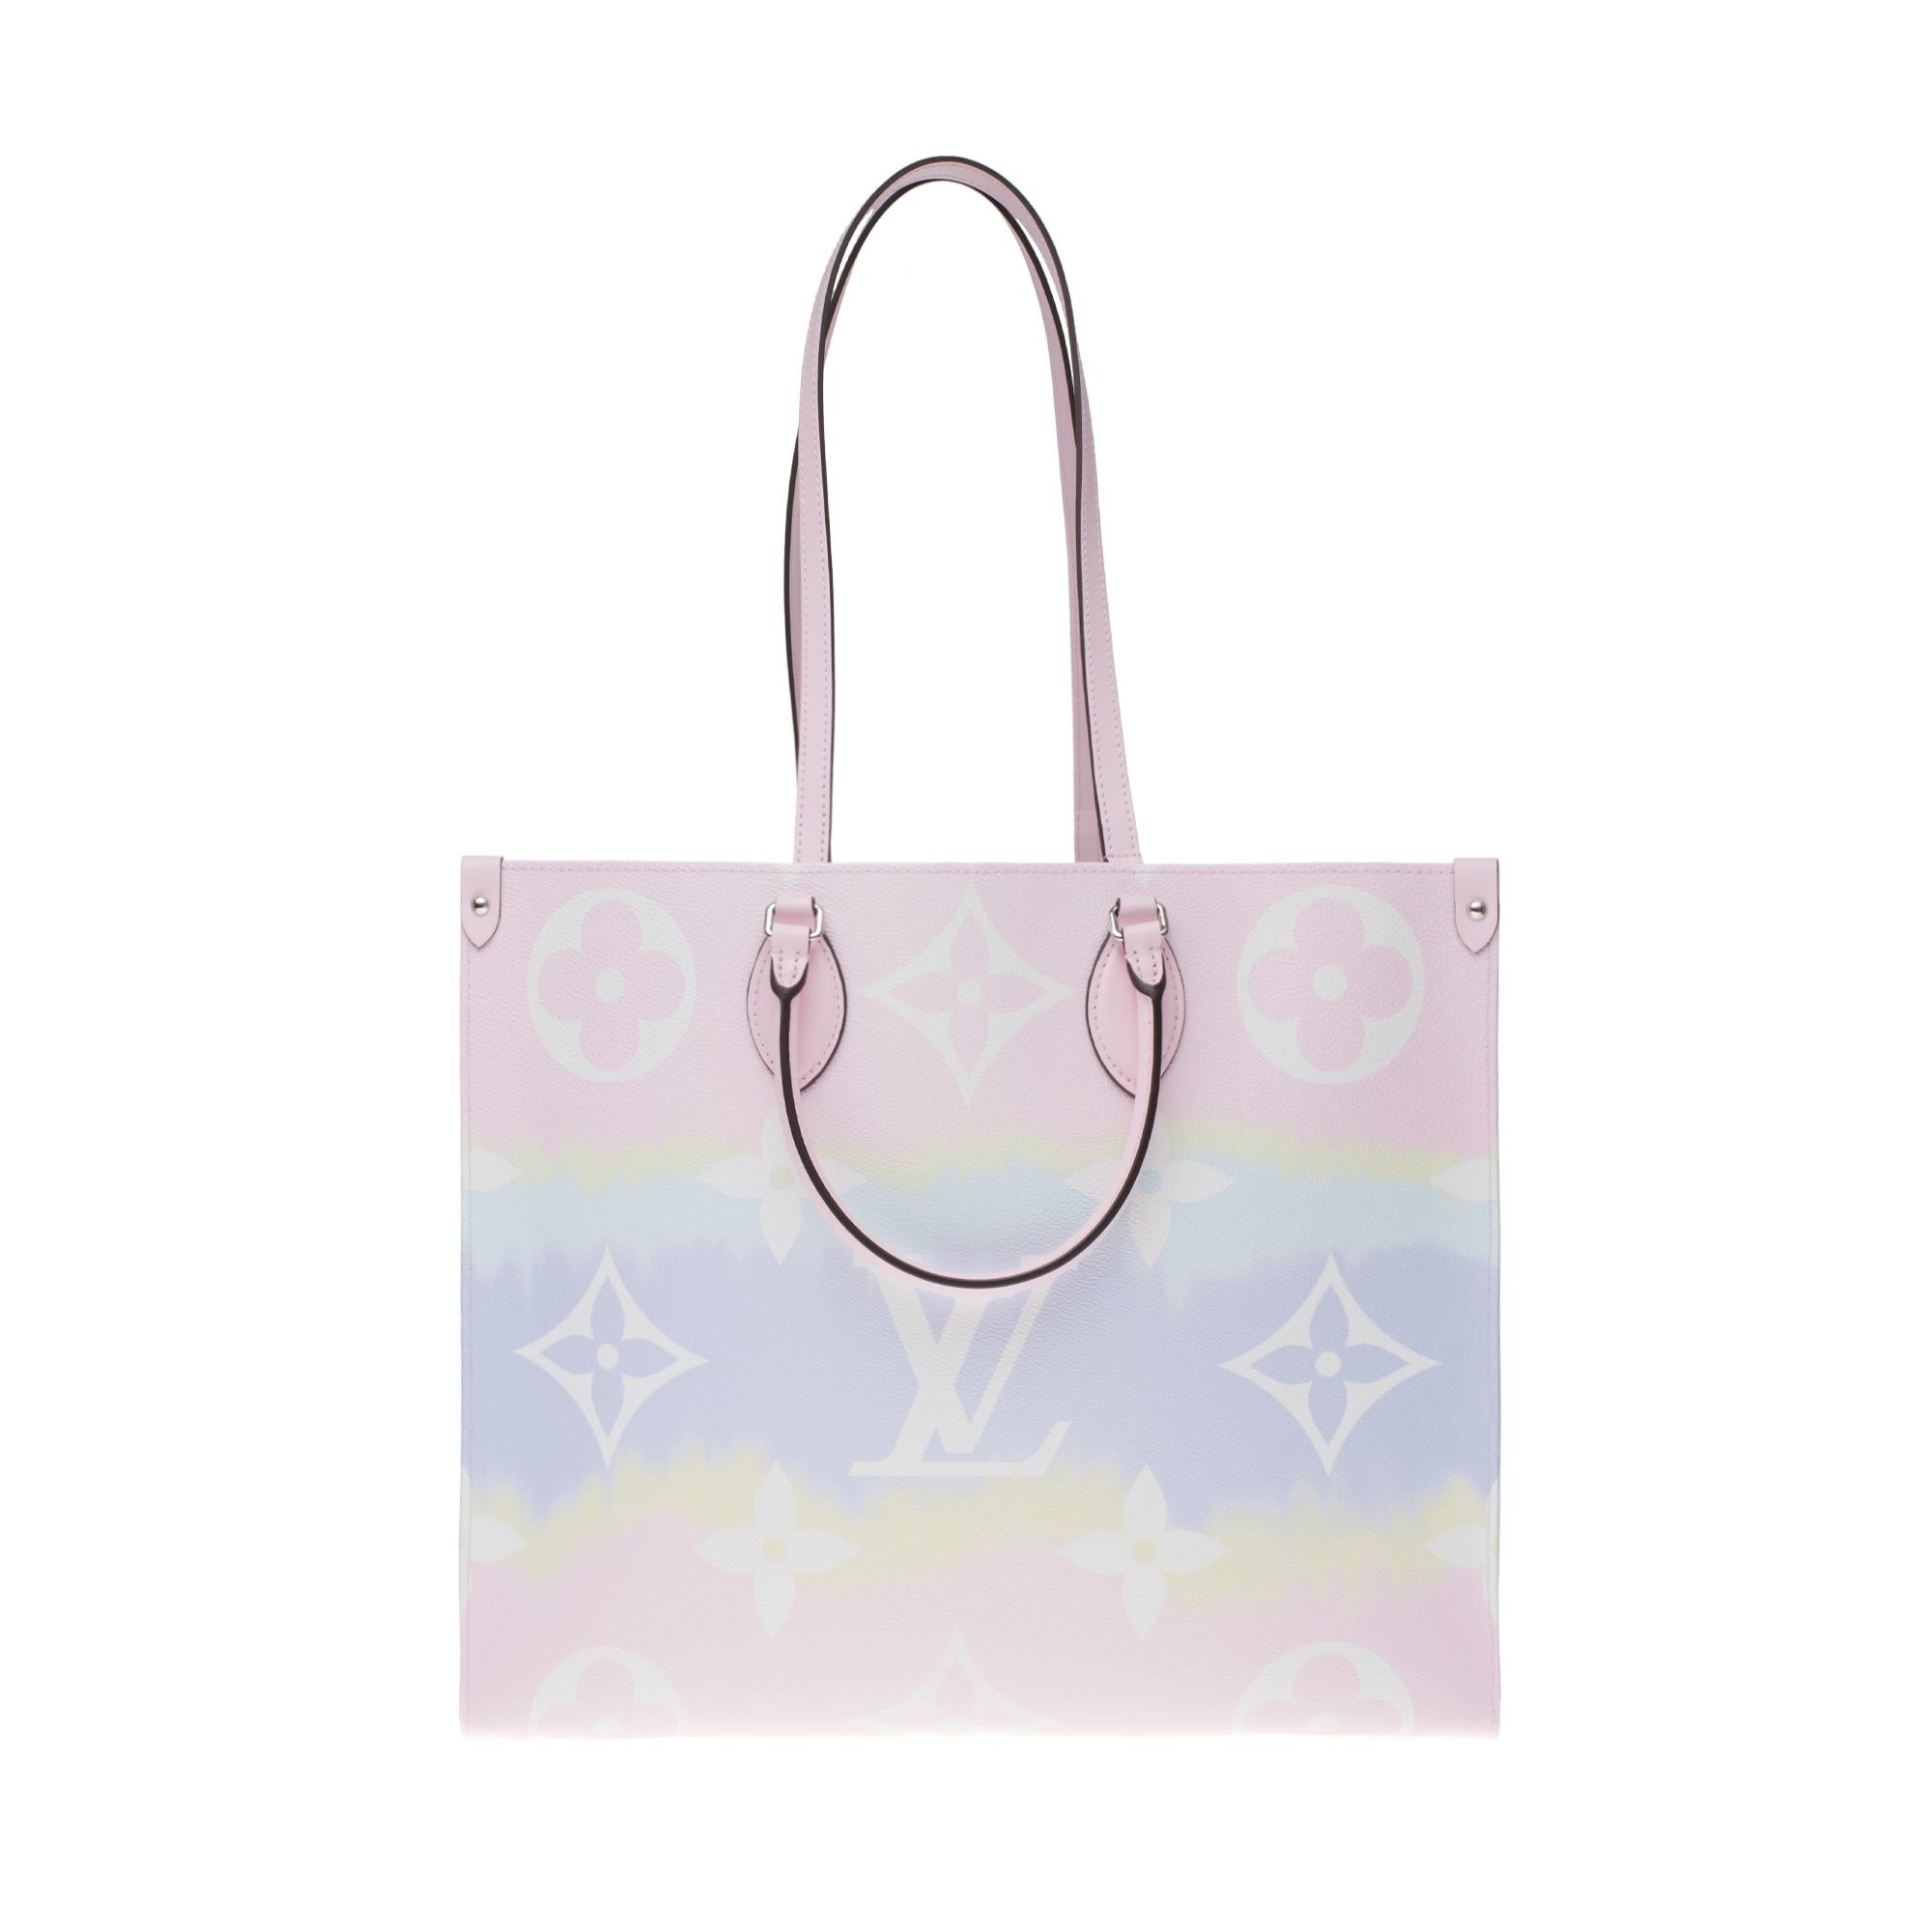 From the LV Escale collection, this Onthego GM tote is revisited in a fresh and colourful spirit for Summer 2020. Its design is inspired by shibori, an ancestral Japanese technique that consists of folding and tying the fabric before dyeing it.